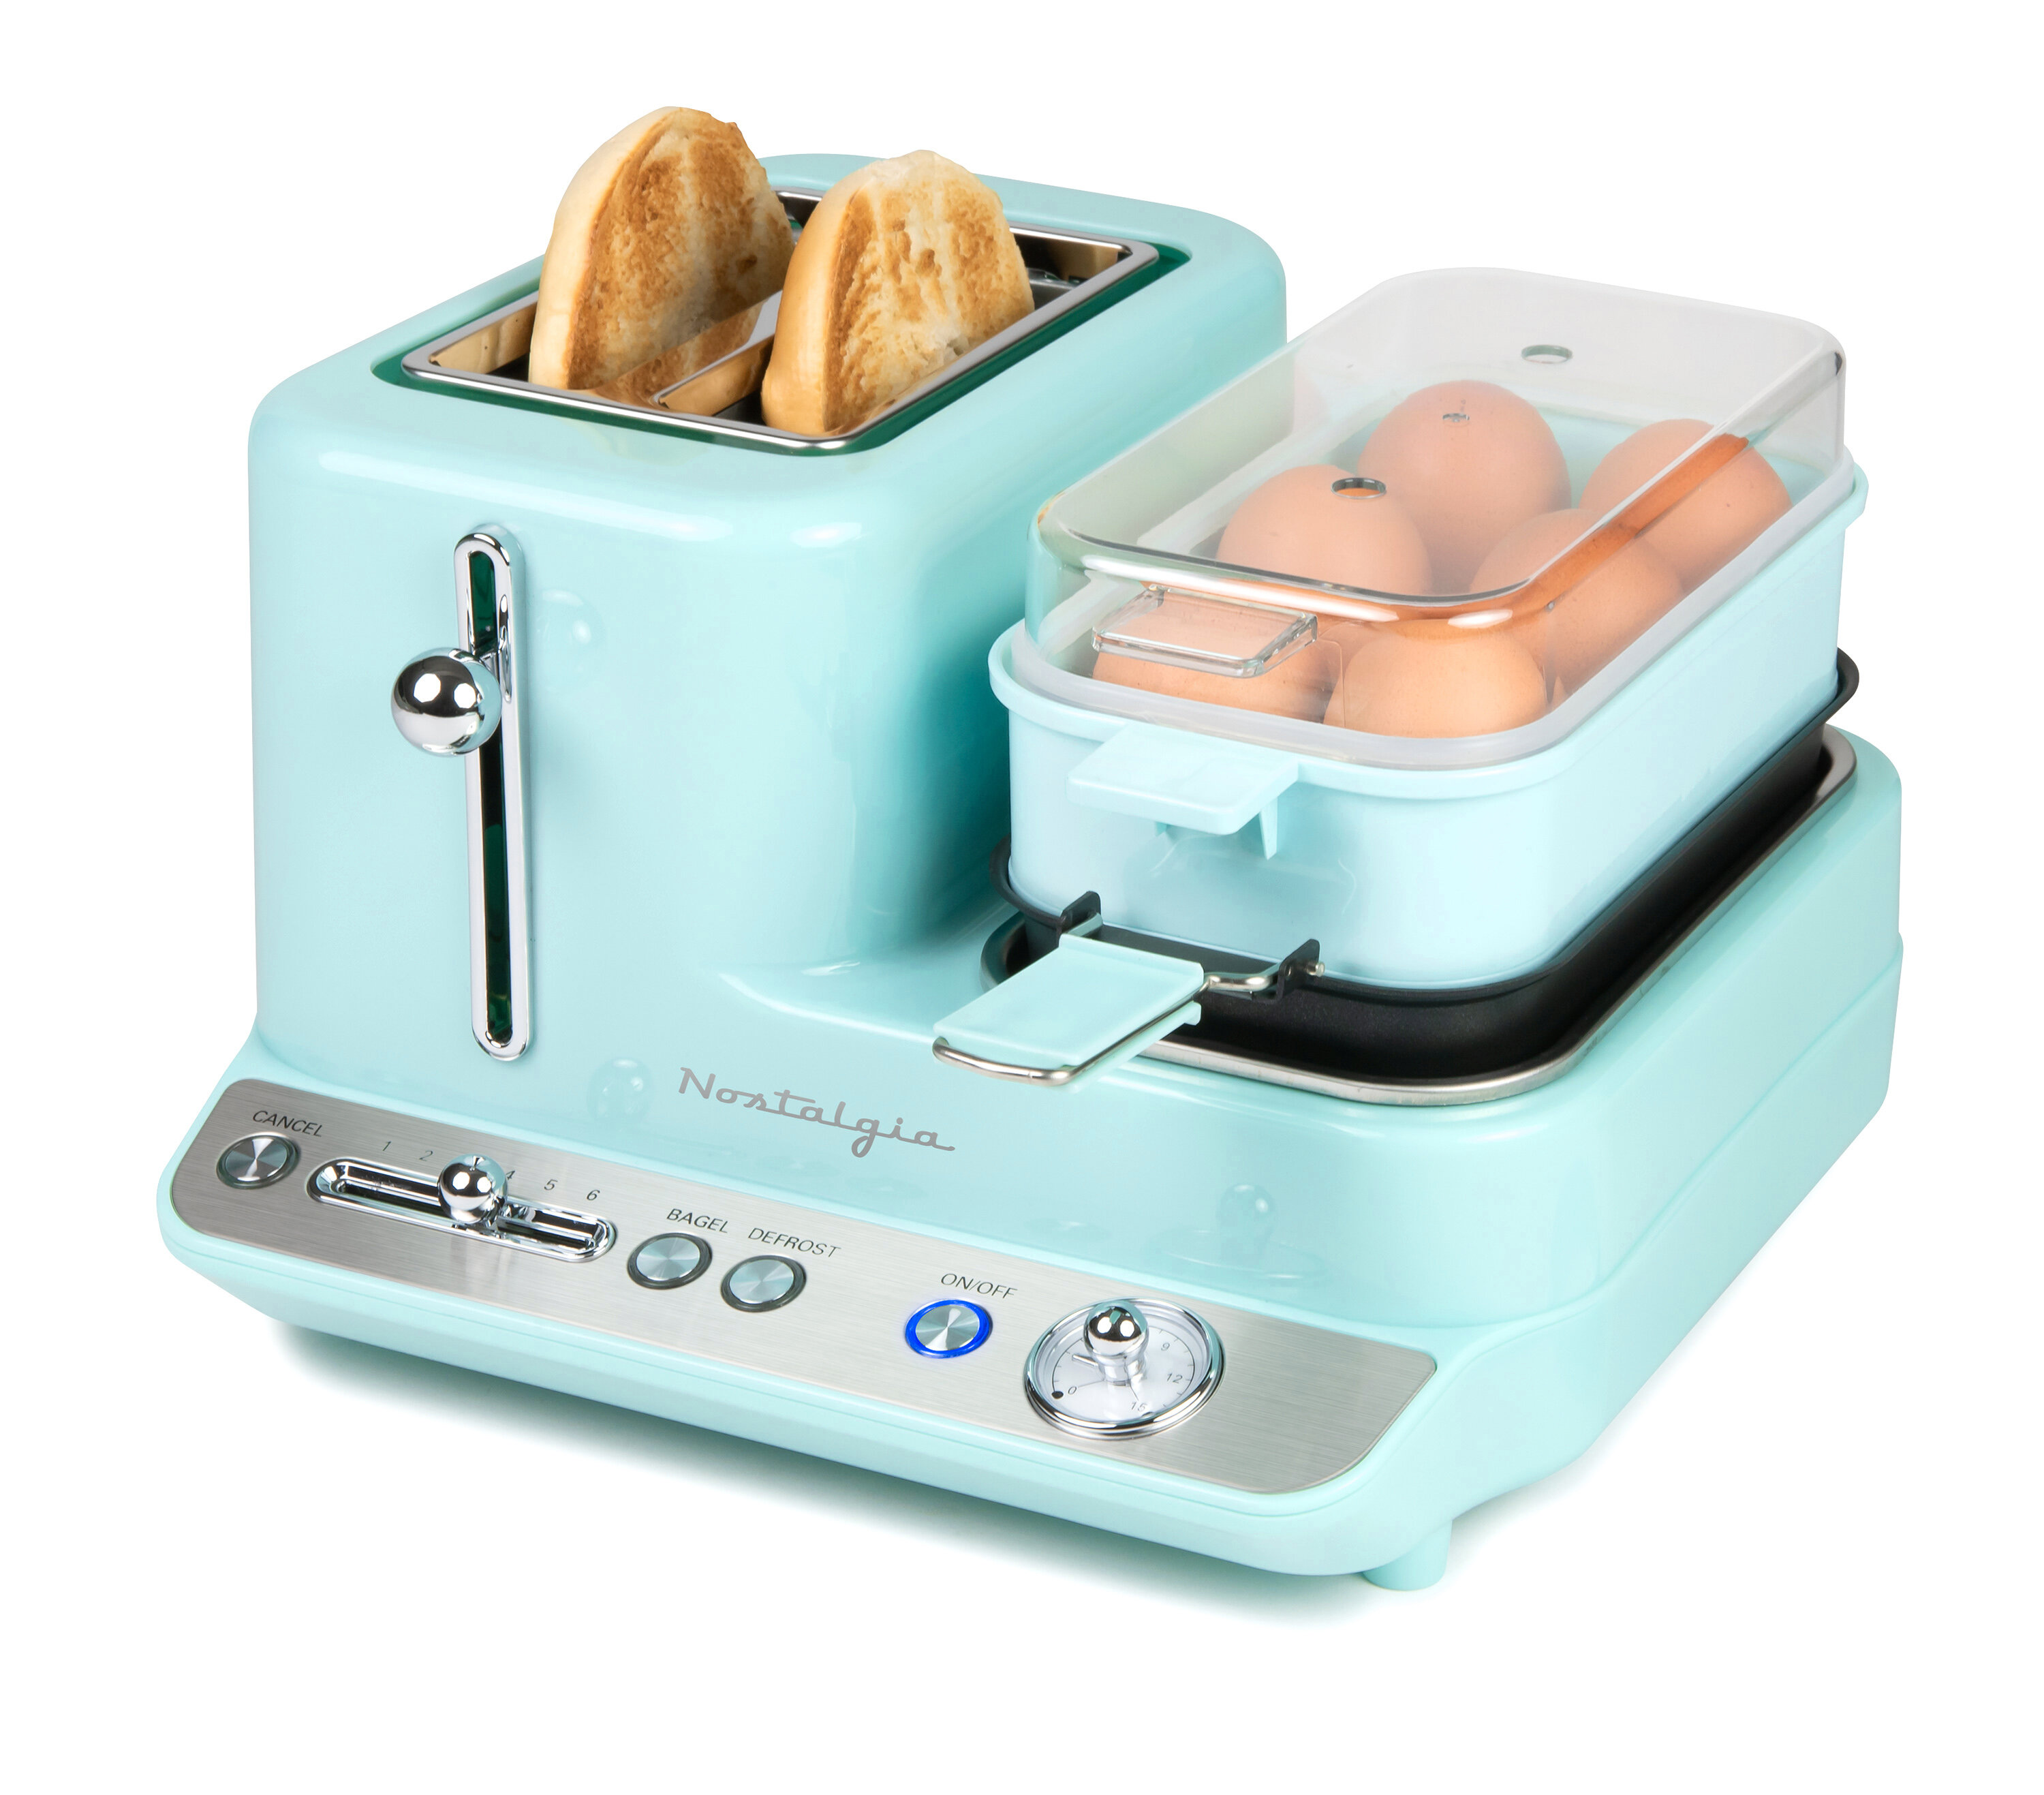 Nostalgia Retro 3-in-1 Family Size Electric Breakfast Station, Coffeemaker,  Griddle, Toaster Oven, Aqua